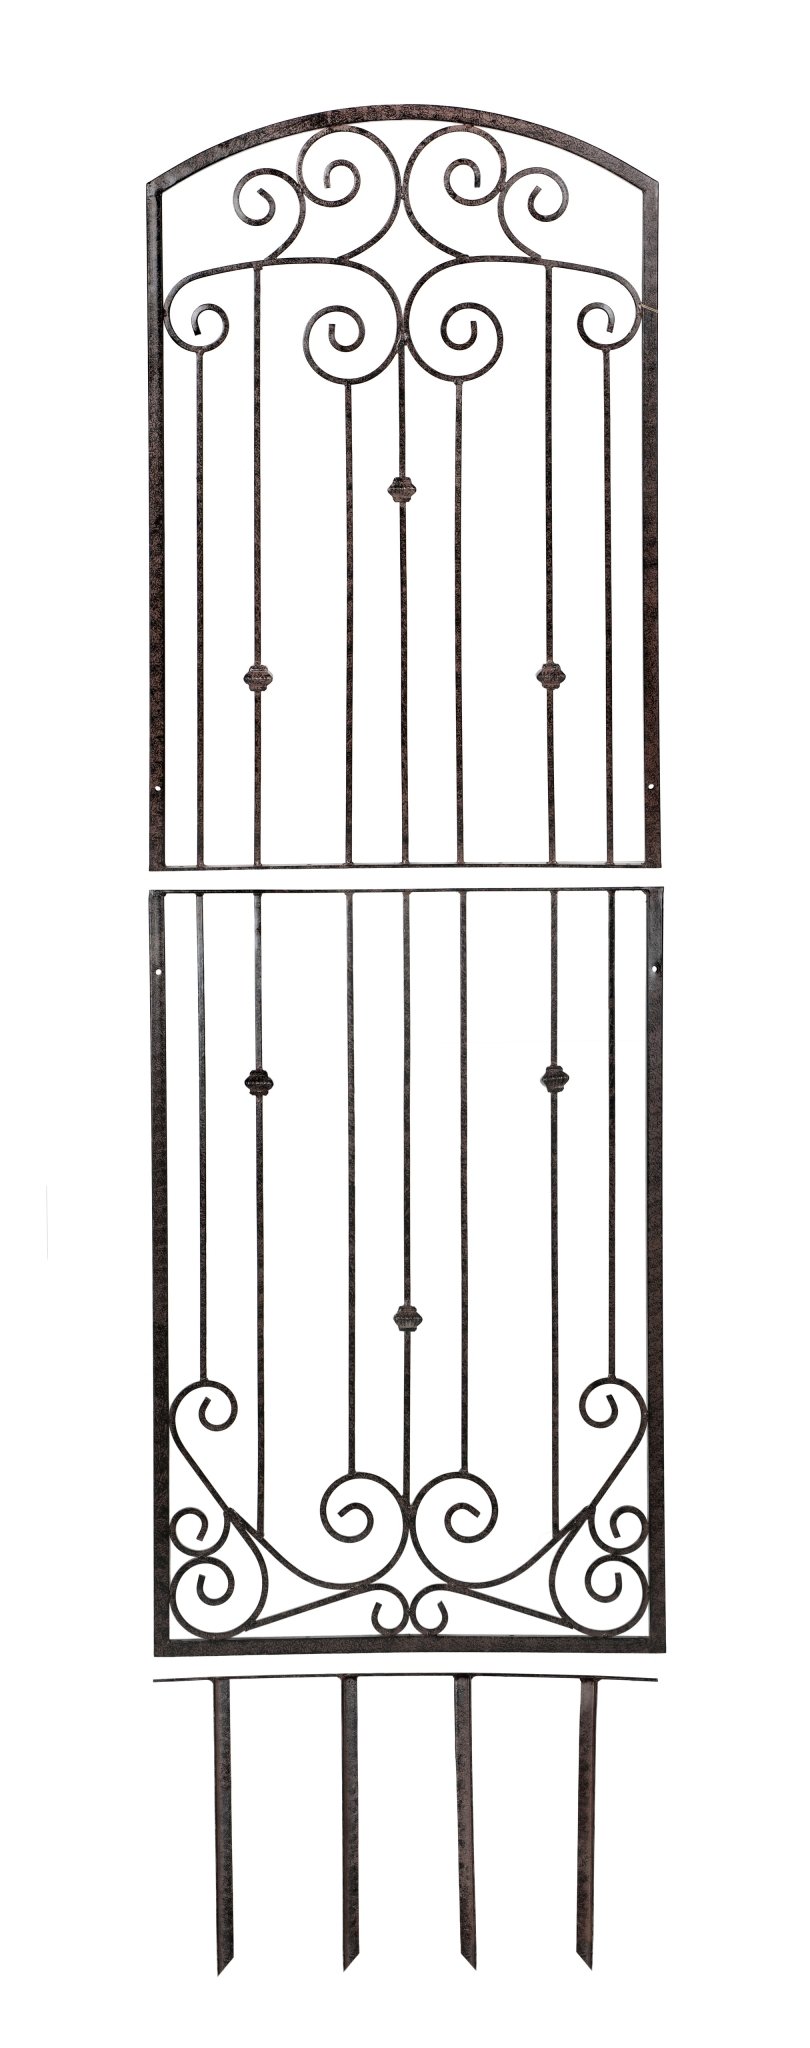 H Potter 8 Foot Wrought Iron Garden Trellis Metal Wall Screen with Wall Mounting Brackets